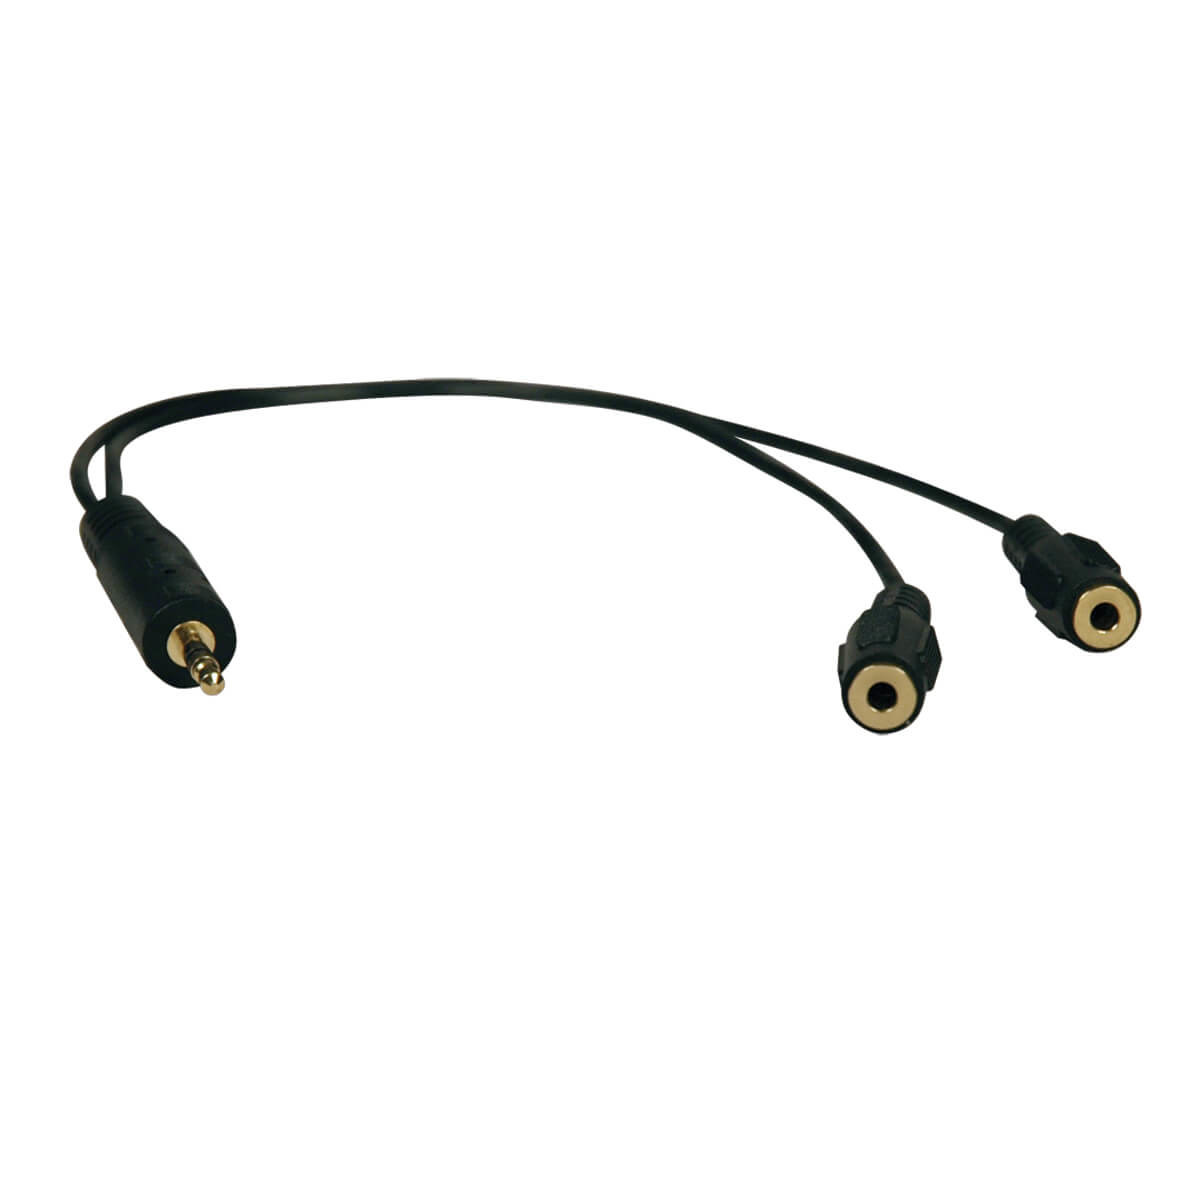 Mini Stereo Y Adapter 3.5mm-2x3.5mm 1ft